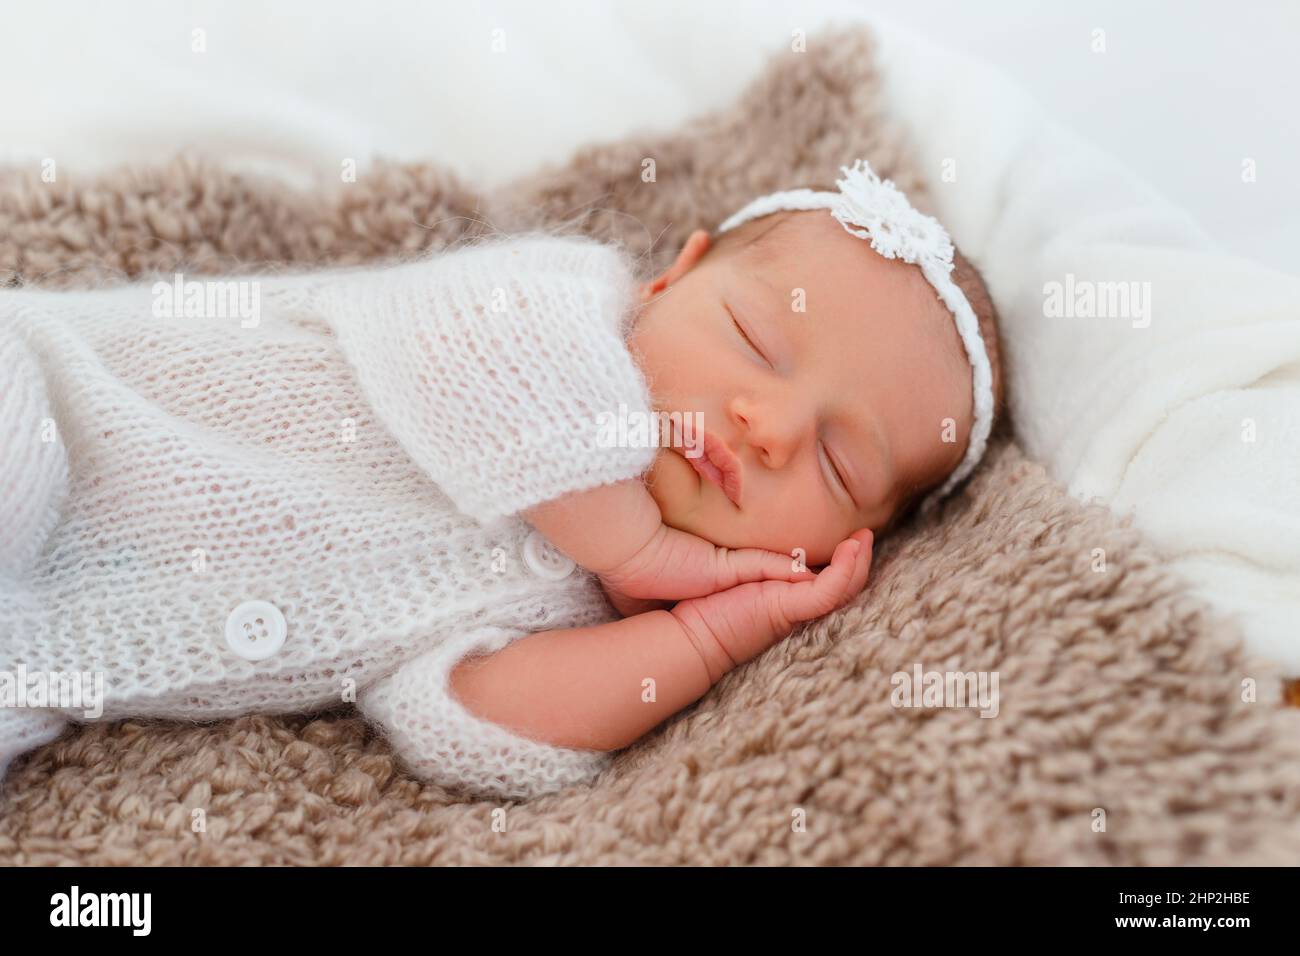 Newborn baby in white knitted suit sleep in wooden basket. Child resting in cute pose. Tiny girl with tender headband on head. Creative infant photogr Stock Photo